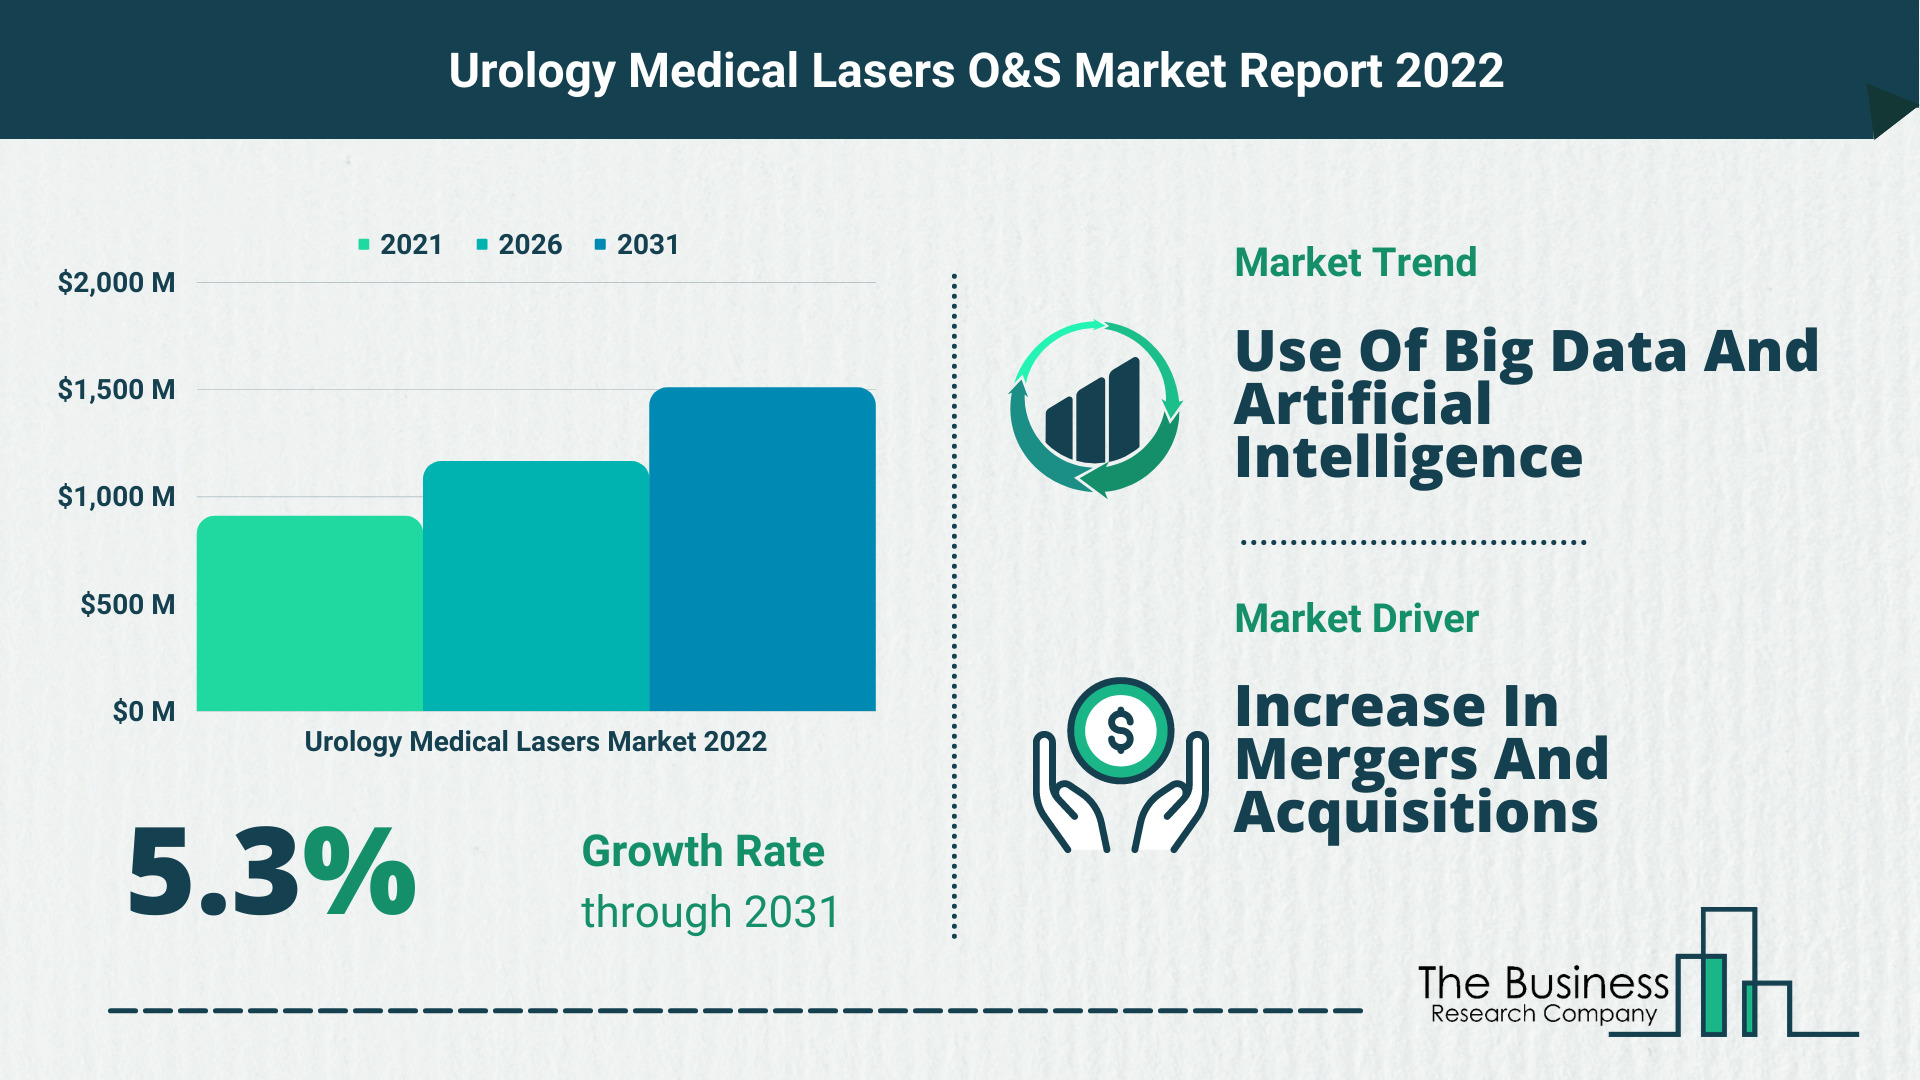 The Urology Medical Lasers Market Forecast Until 2030 – Opportunities And Strategies